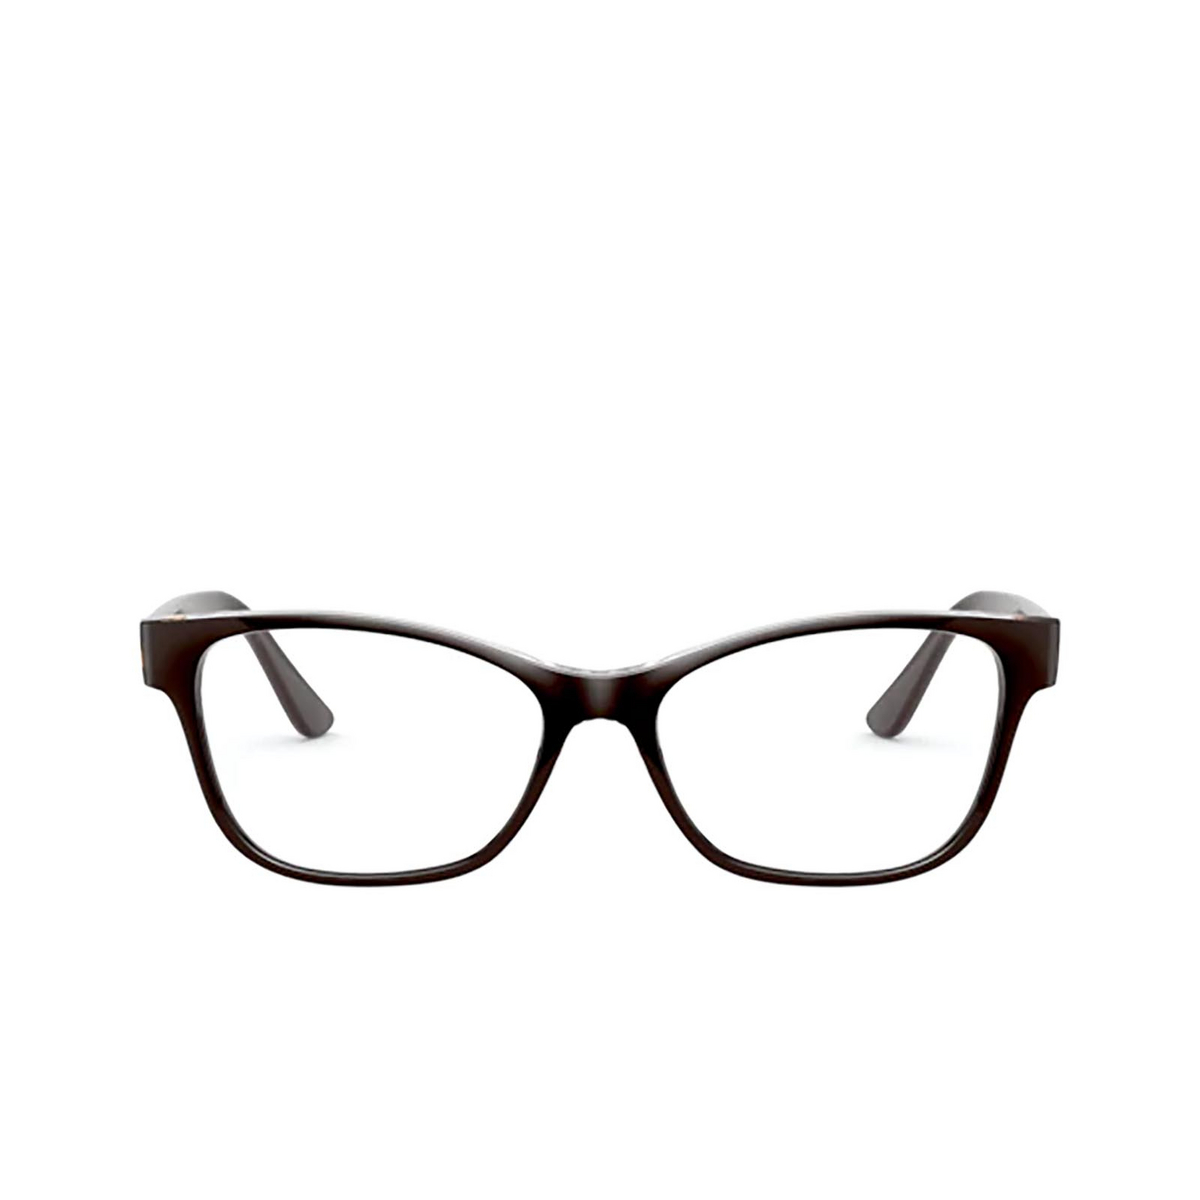 Vogue® Square Eyeglasses: VO5335 color Top Brown / Serigraphy 2842 - front view.